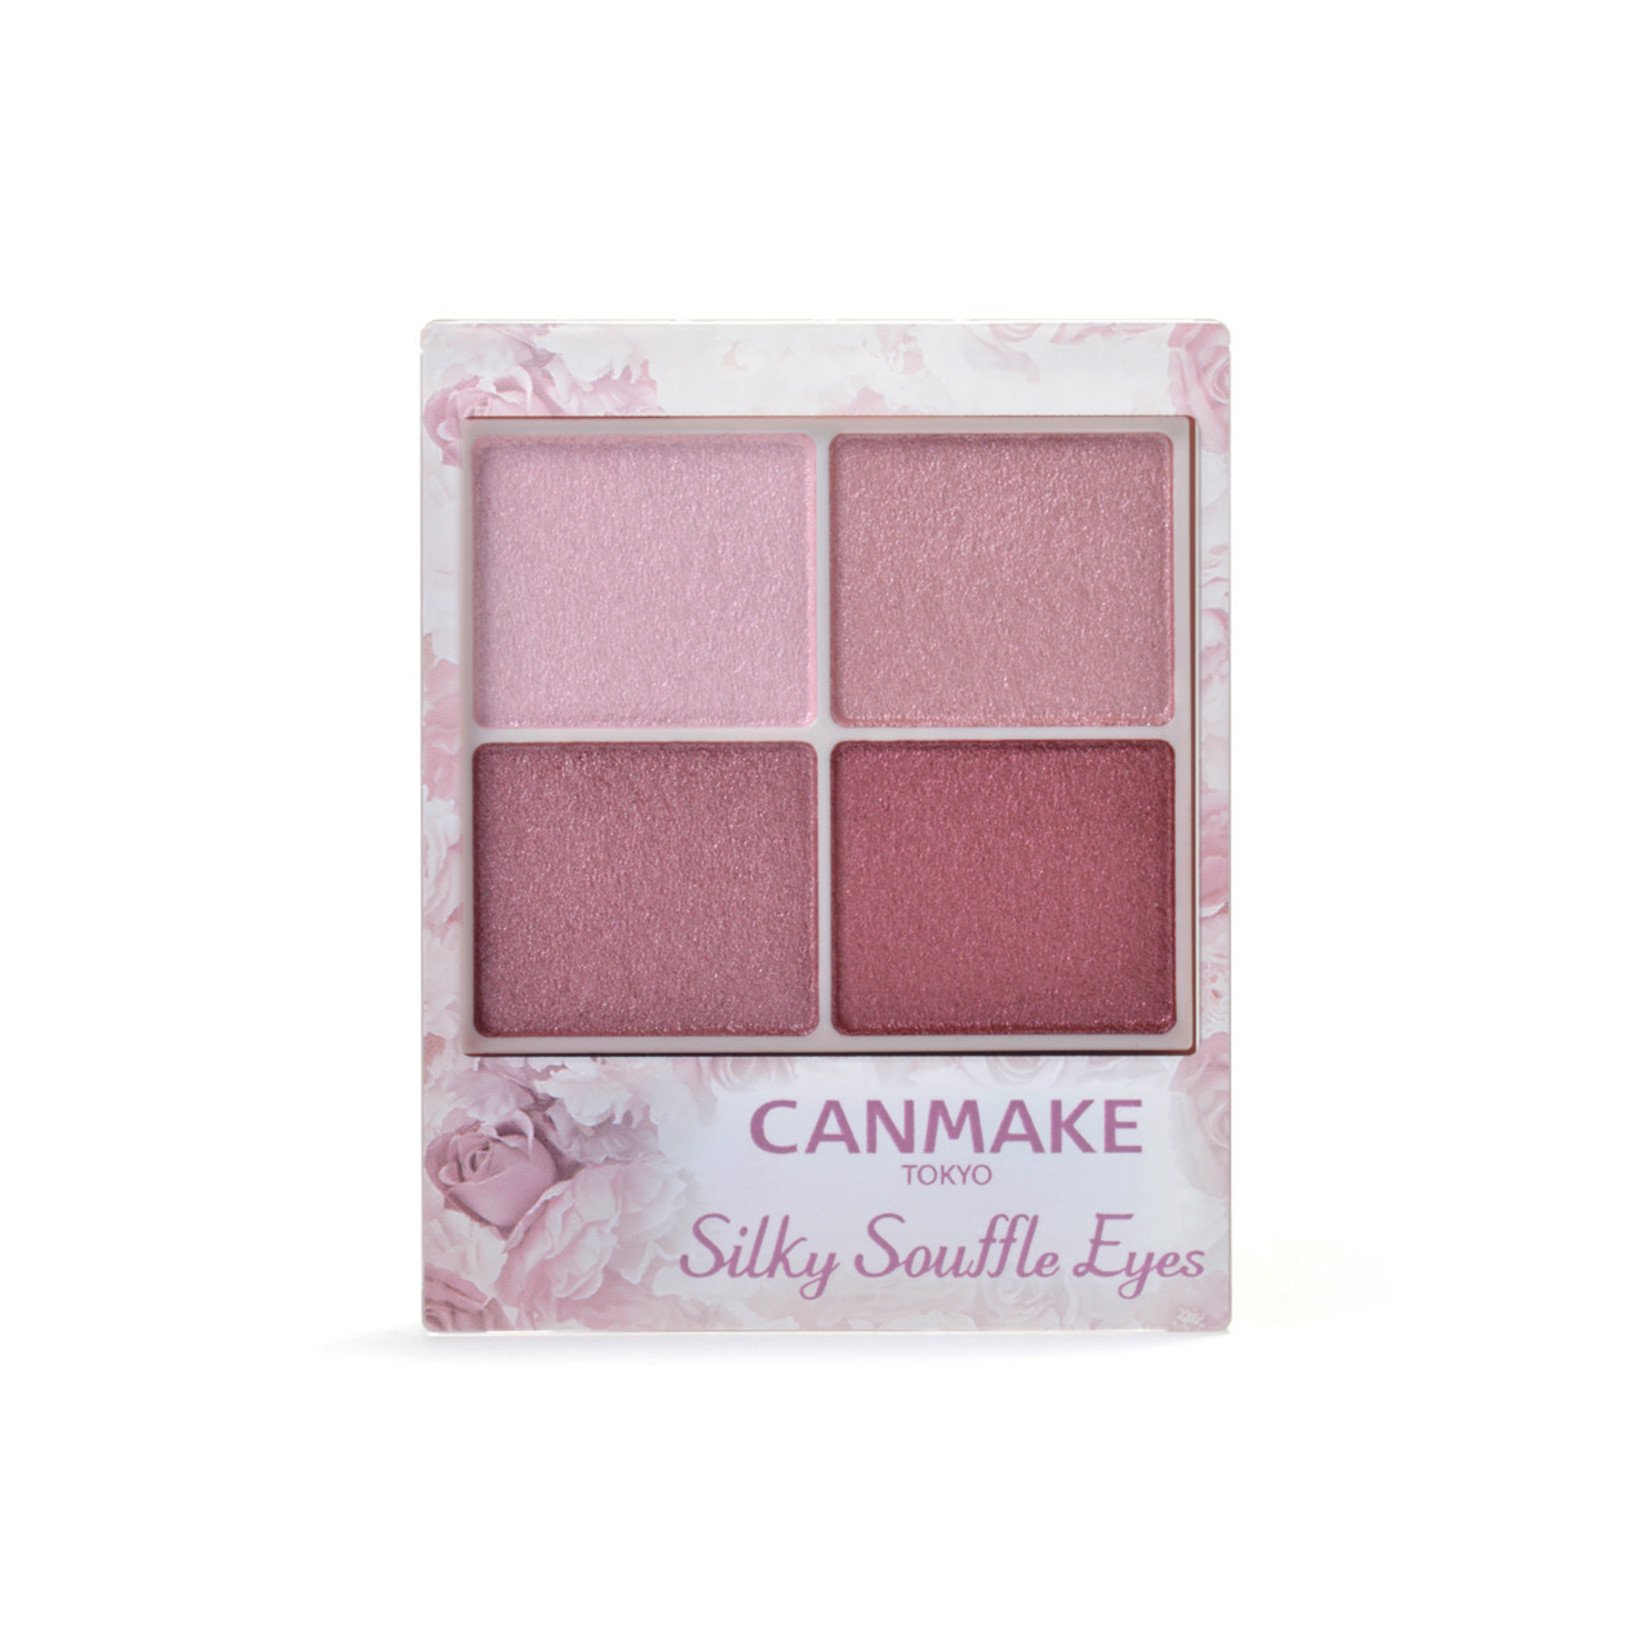 Canmake Canmake Silky Souffle Eyes 06 Topaz Pink